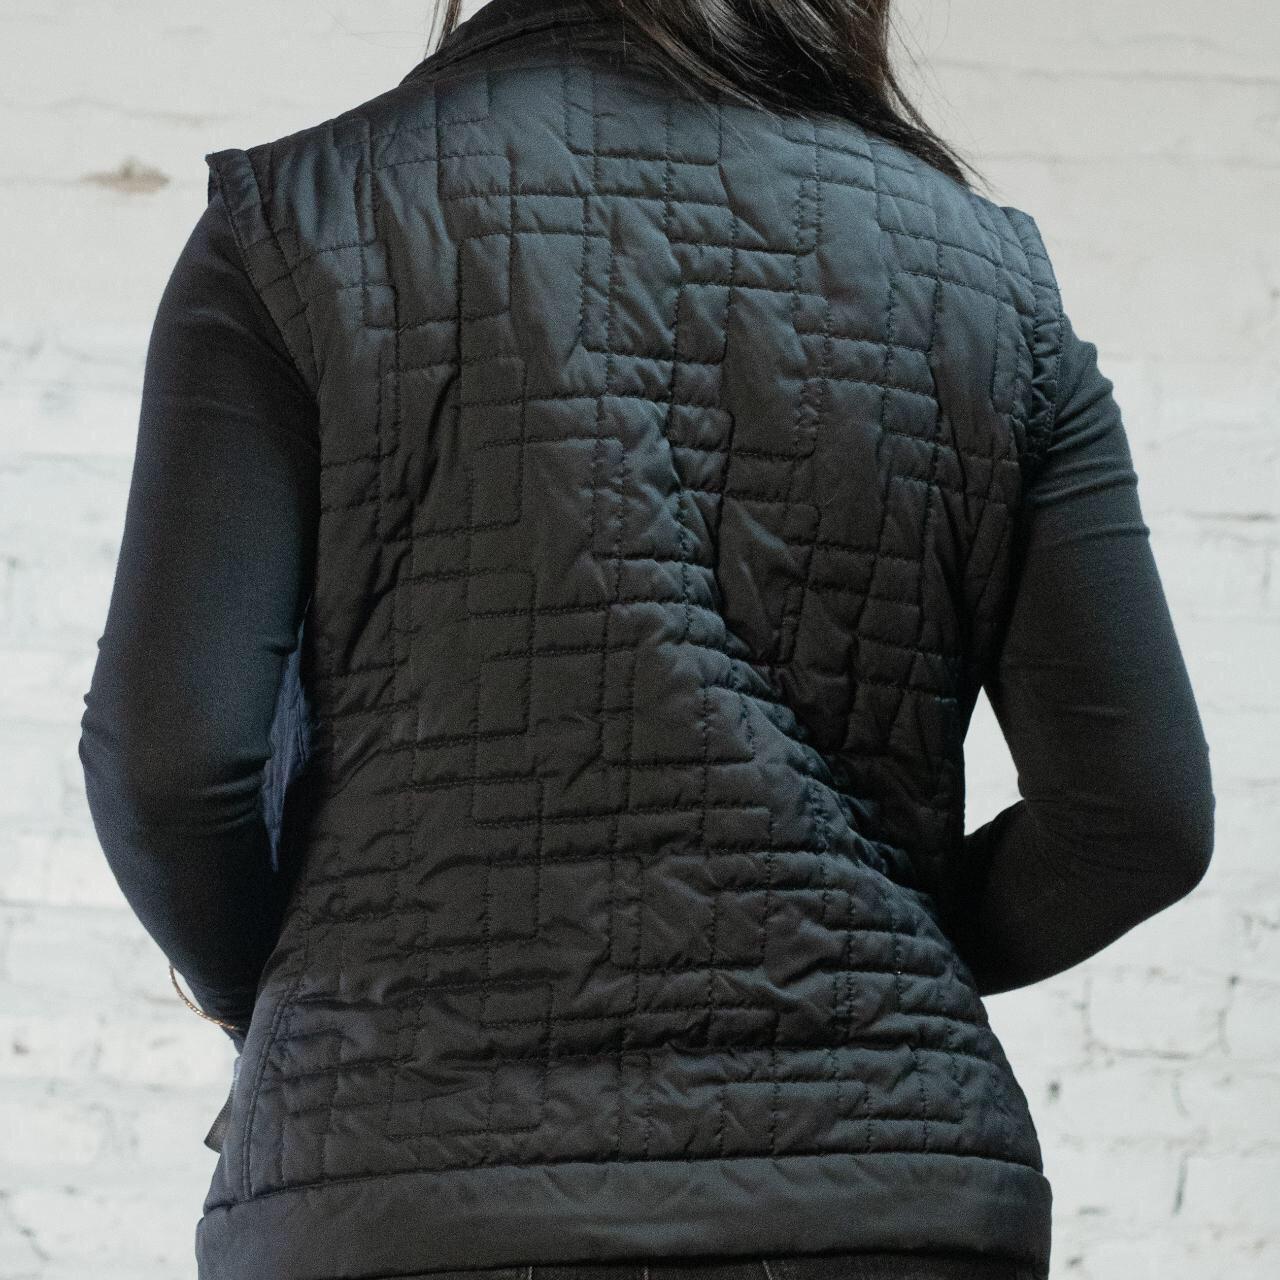 Product Image 3 - Black Nike ACG Quilted Vest

Black